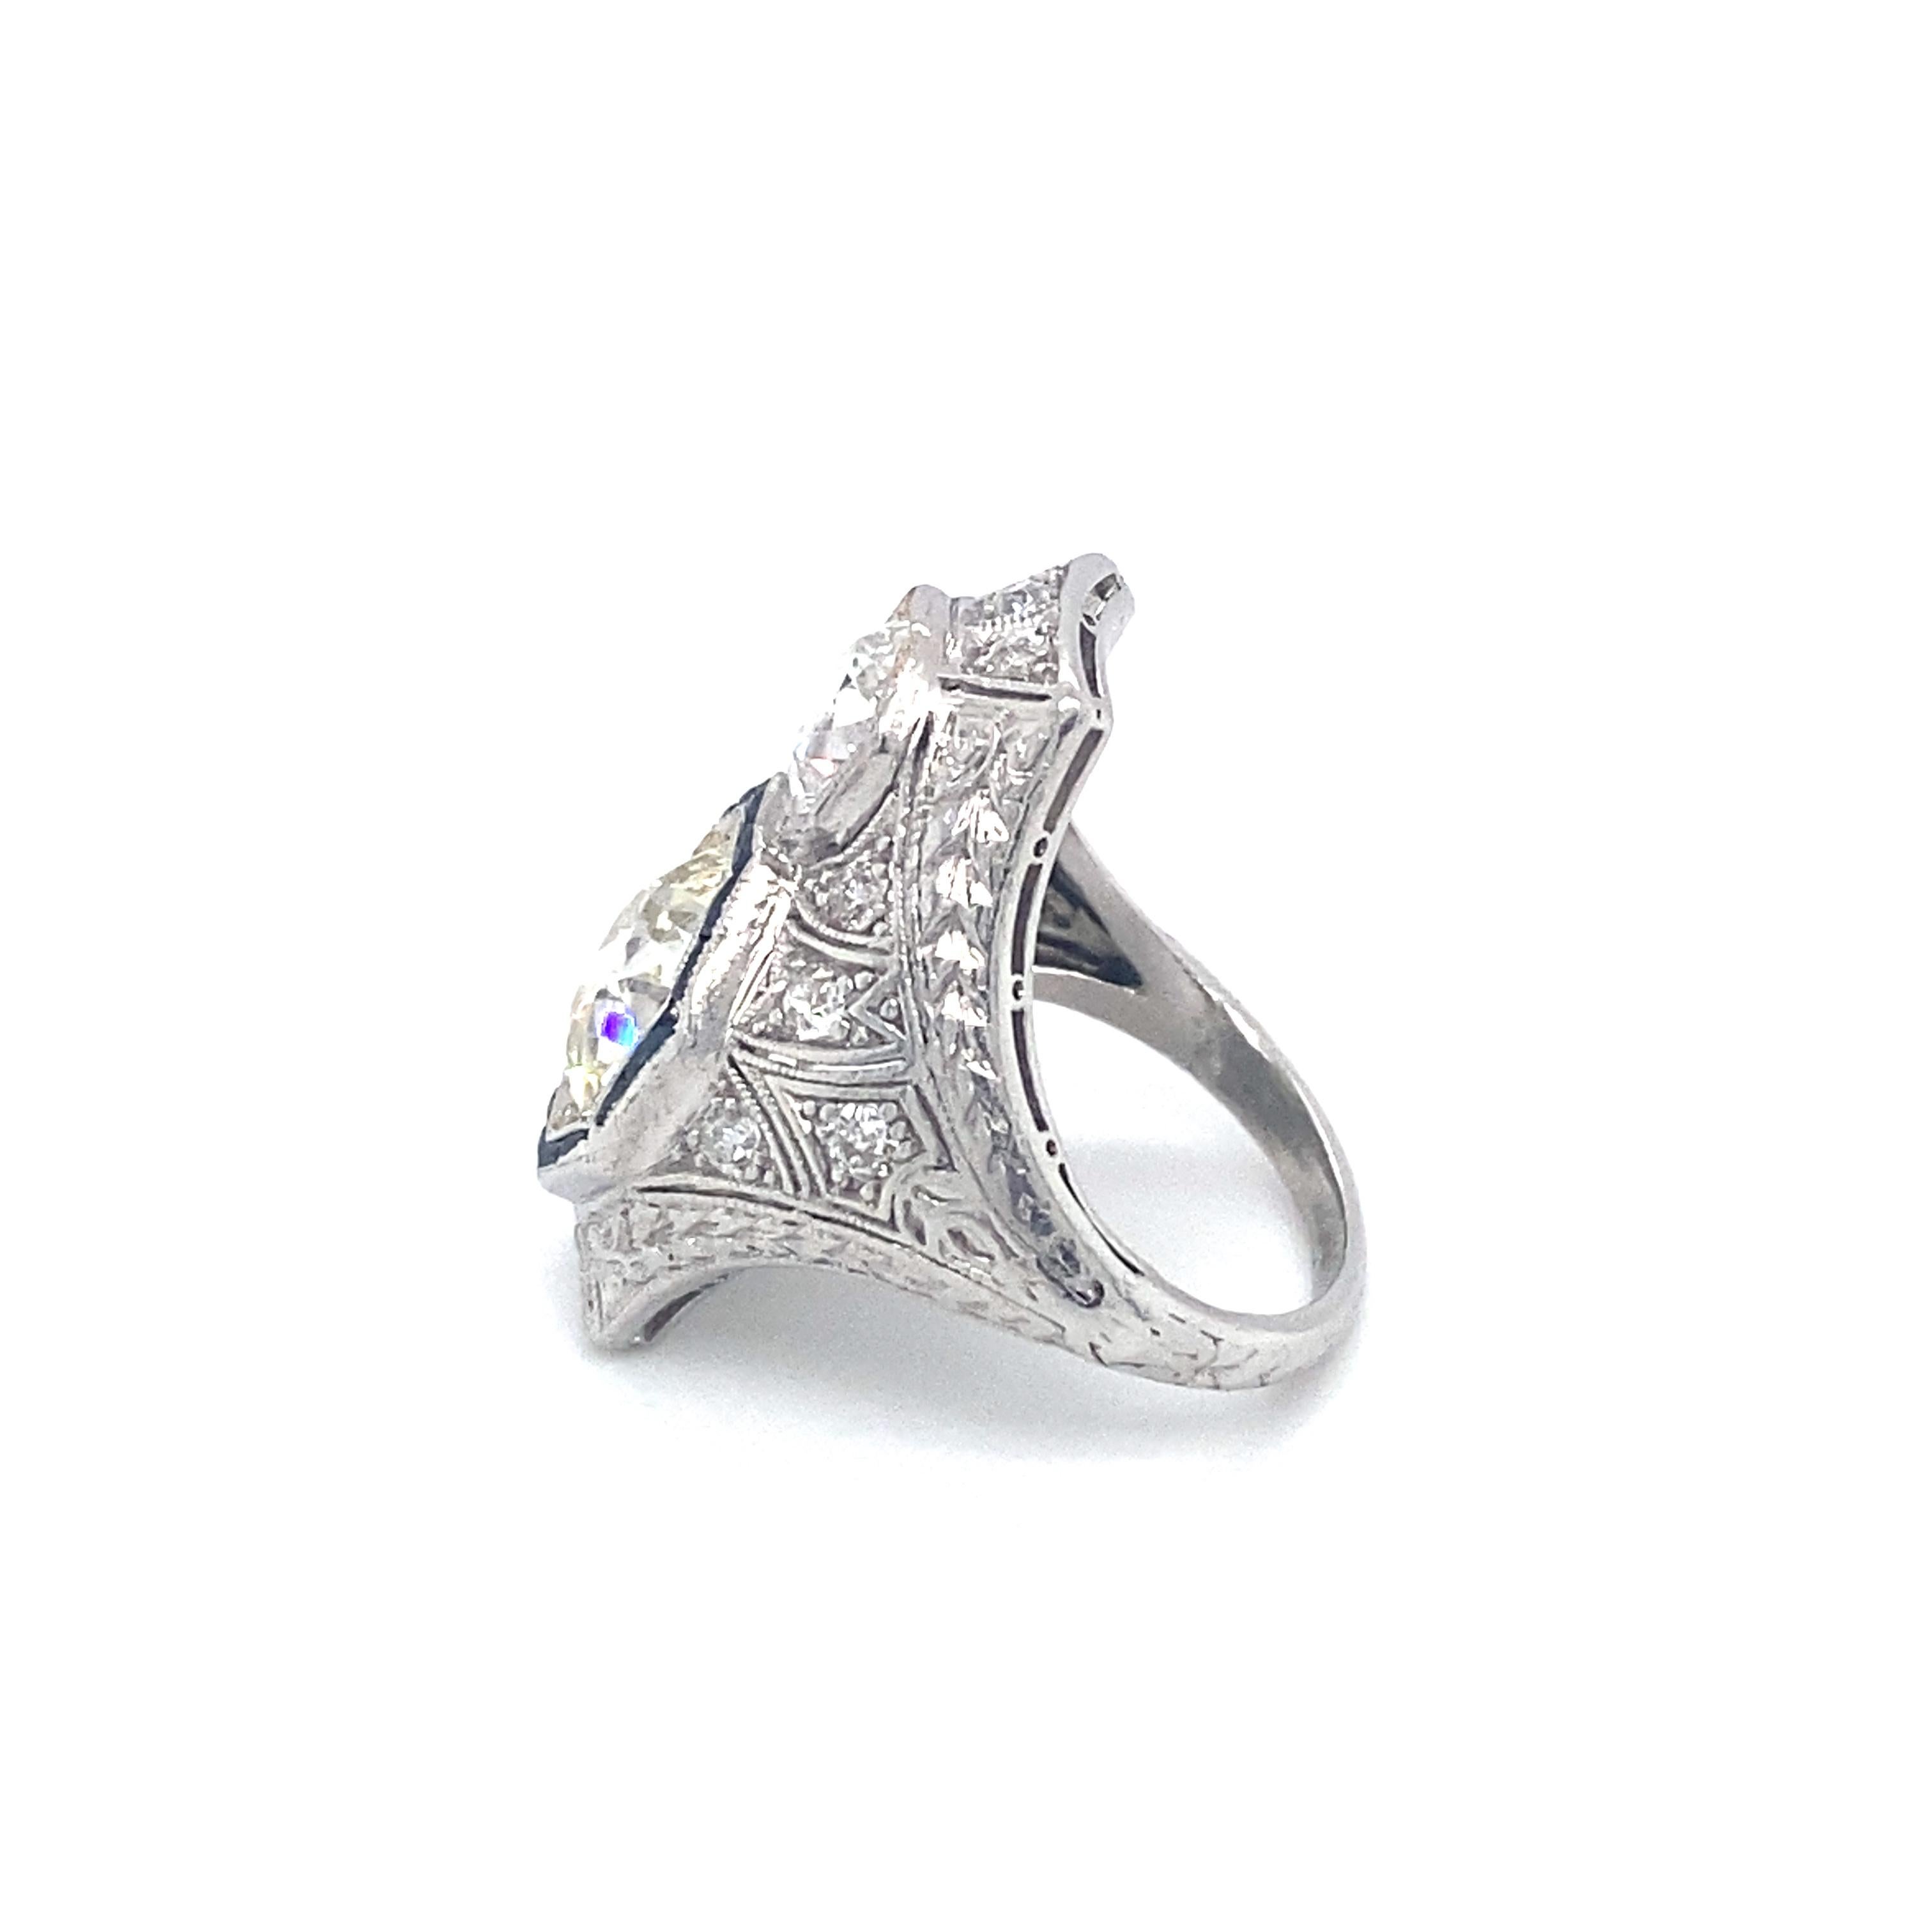 Item Details: This spectacular ring has a large 2.50 Carat Old European cut diamond with approximately 1.20 carats of accent diamonds and sapphires. It is ornate, exquisite and bold! Platinum crafted, it is a great example of the design from the